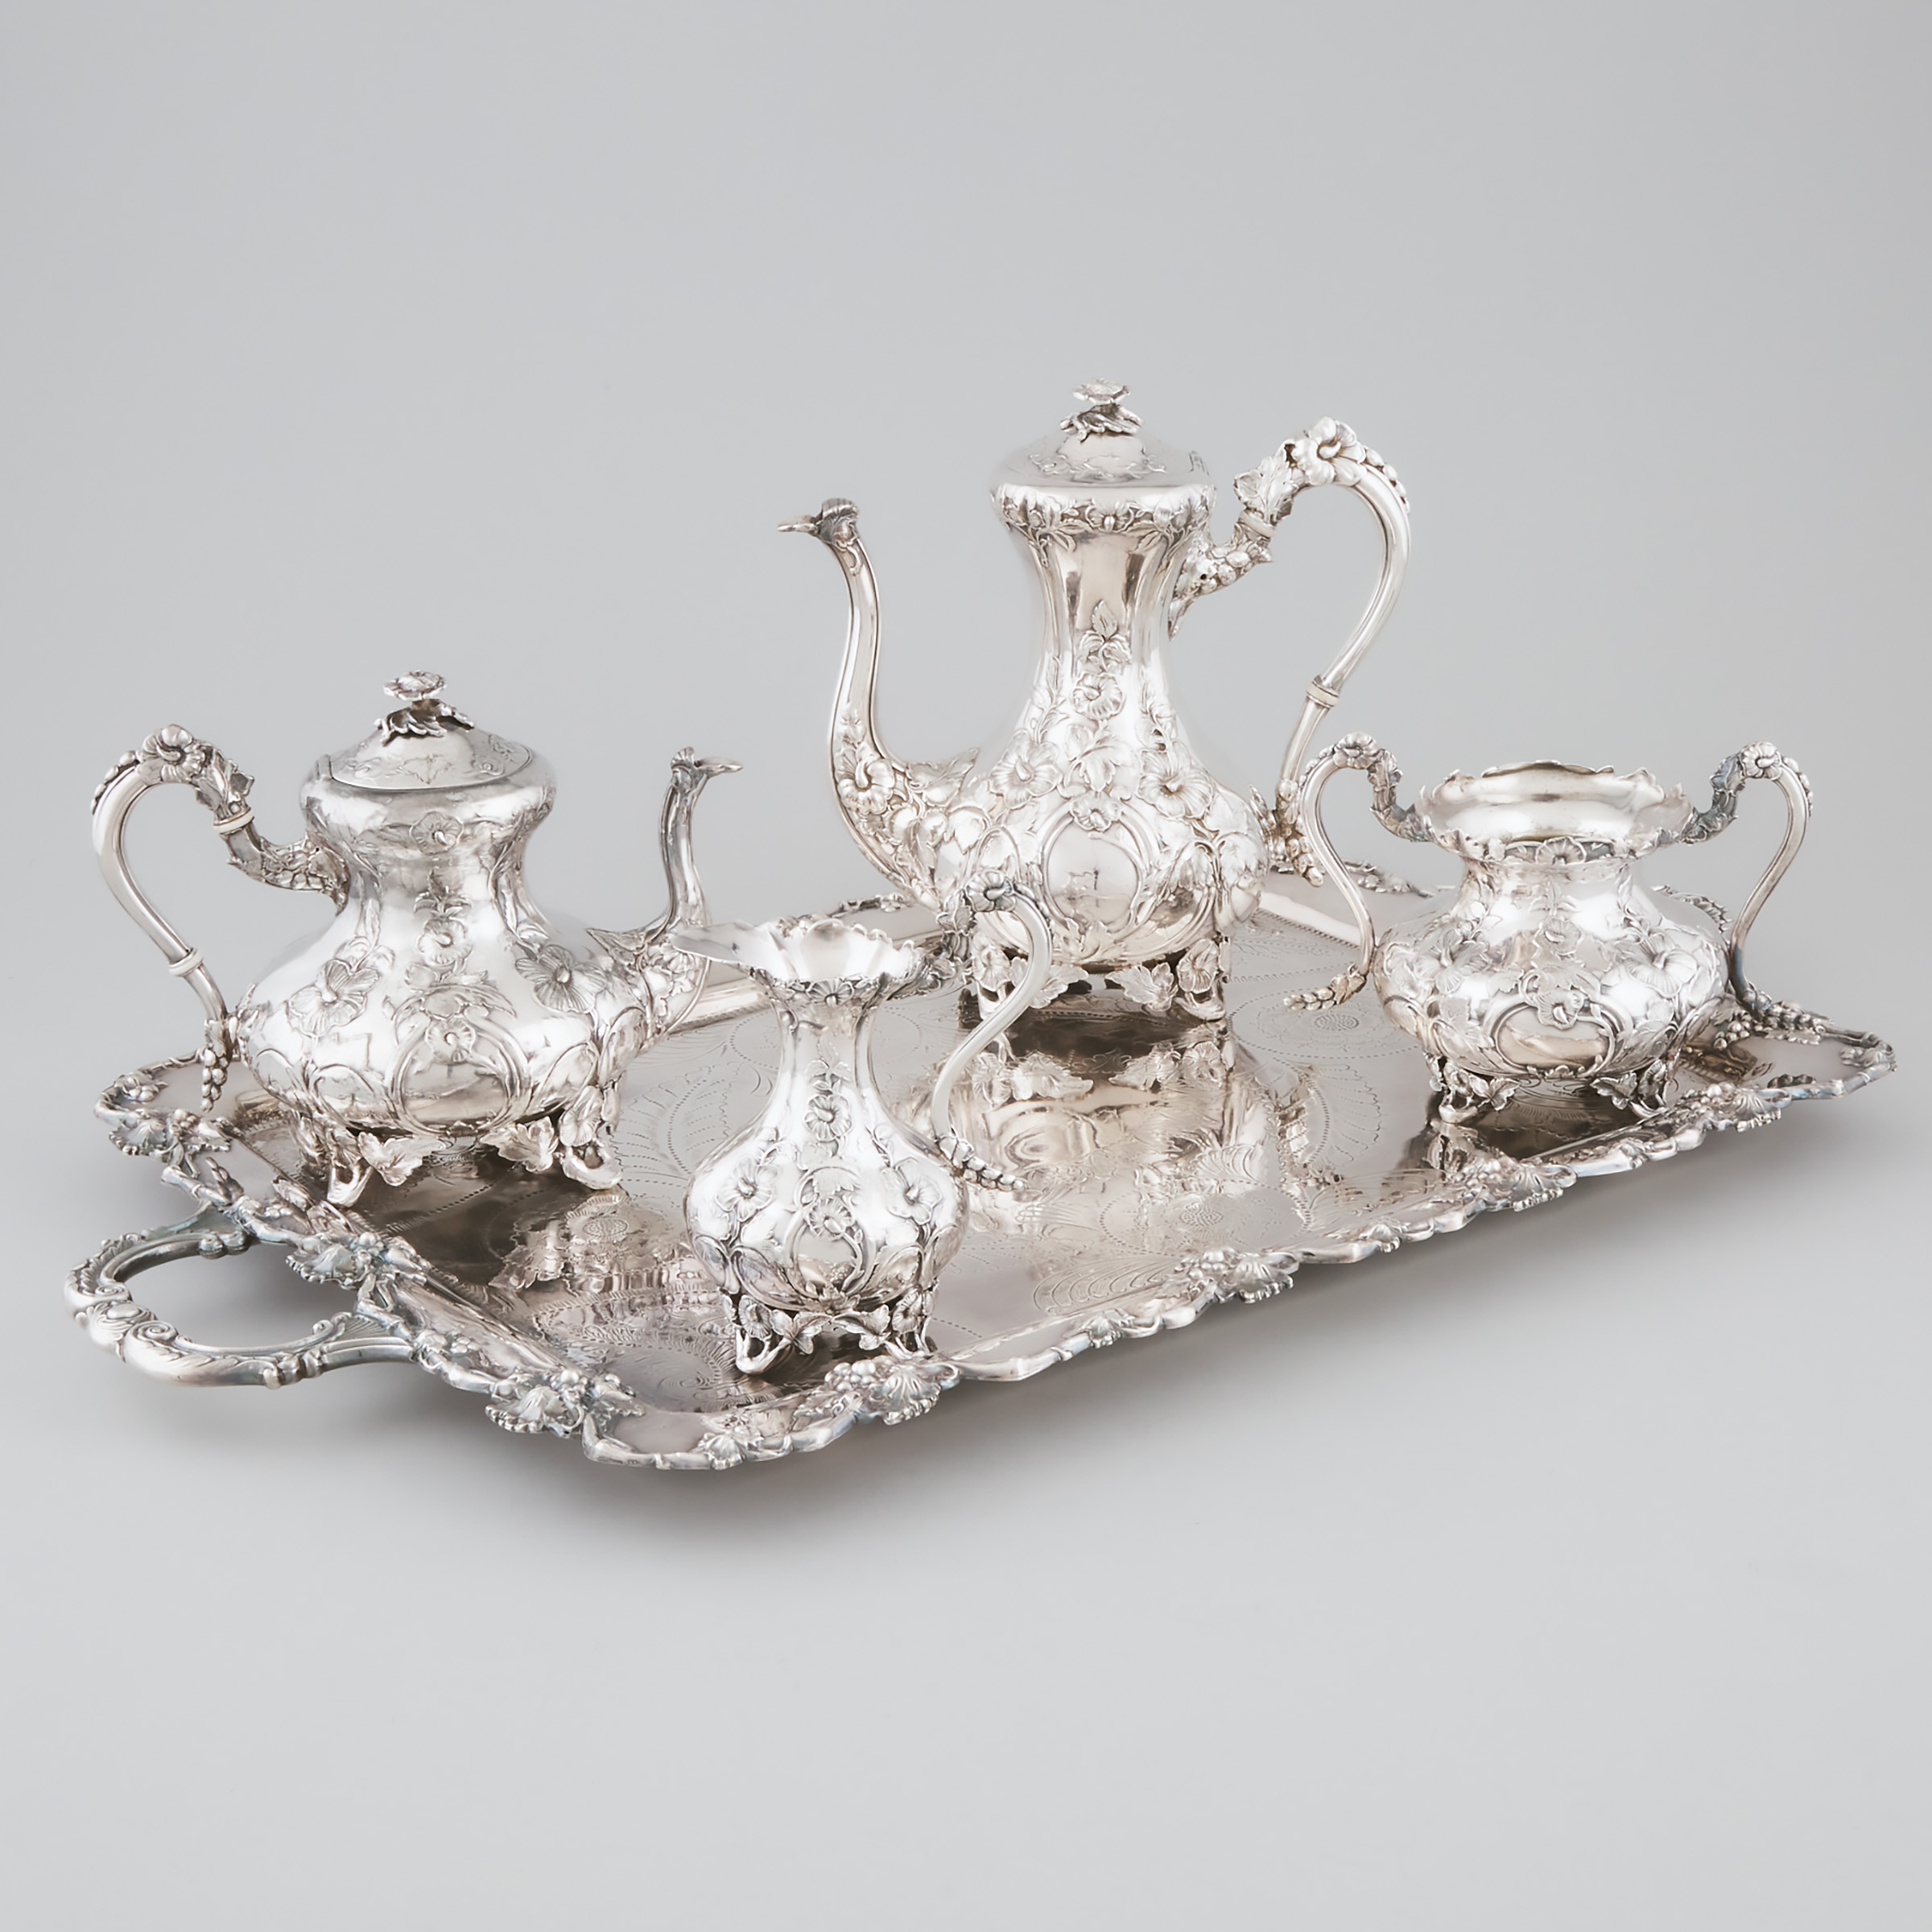 Victorian Silver Plated Tea and Coffee Service, late 19th century